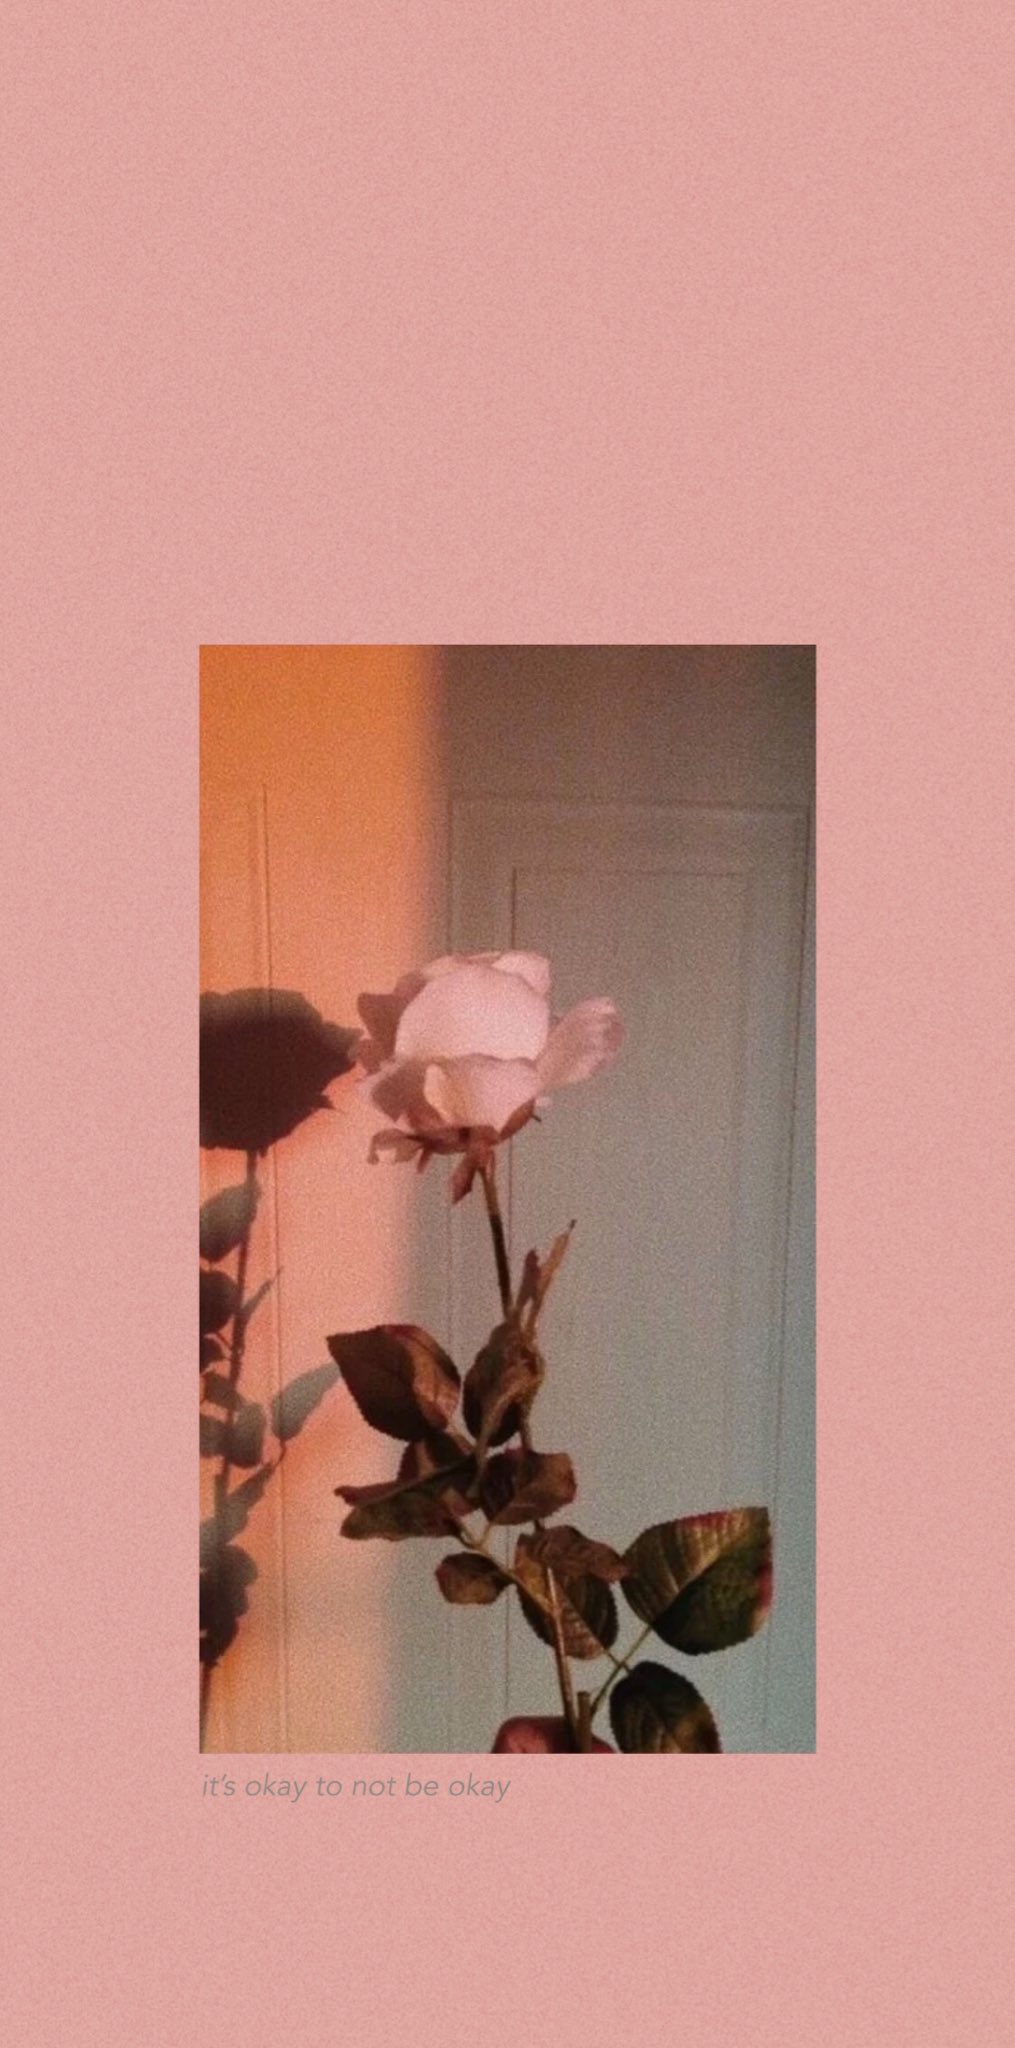 Aesthetic phone background of a pink rose - Beautiful